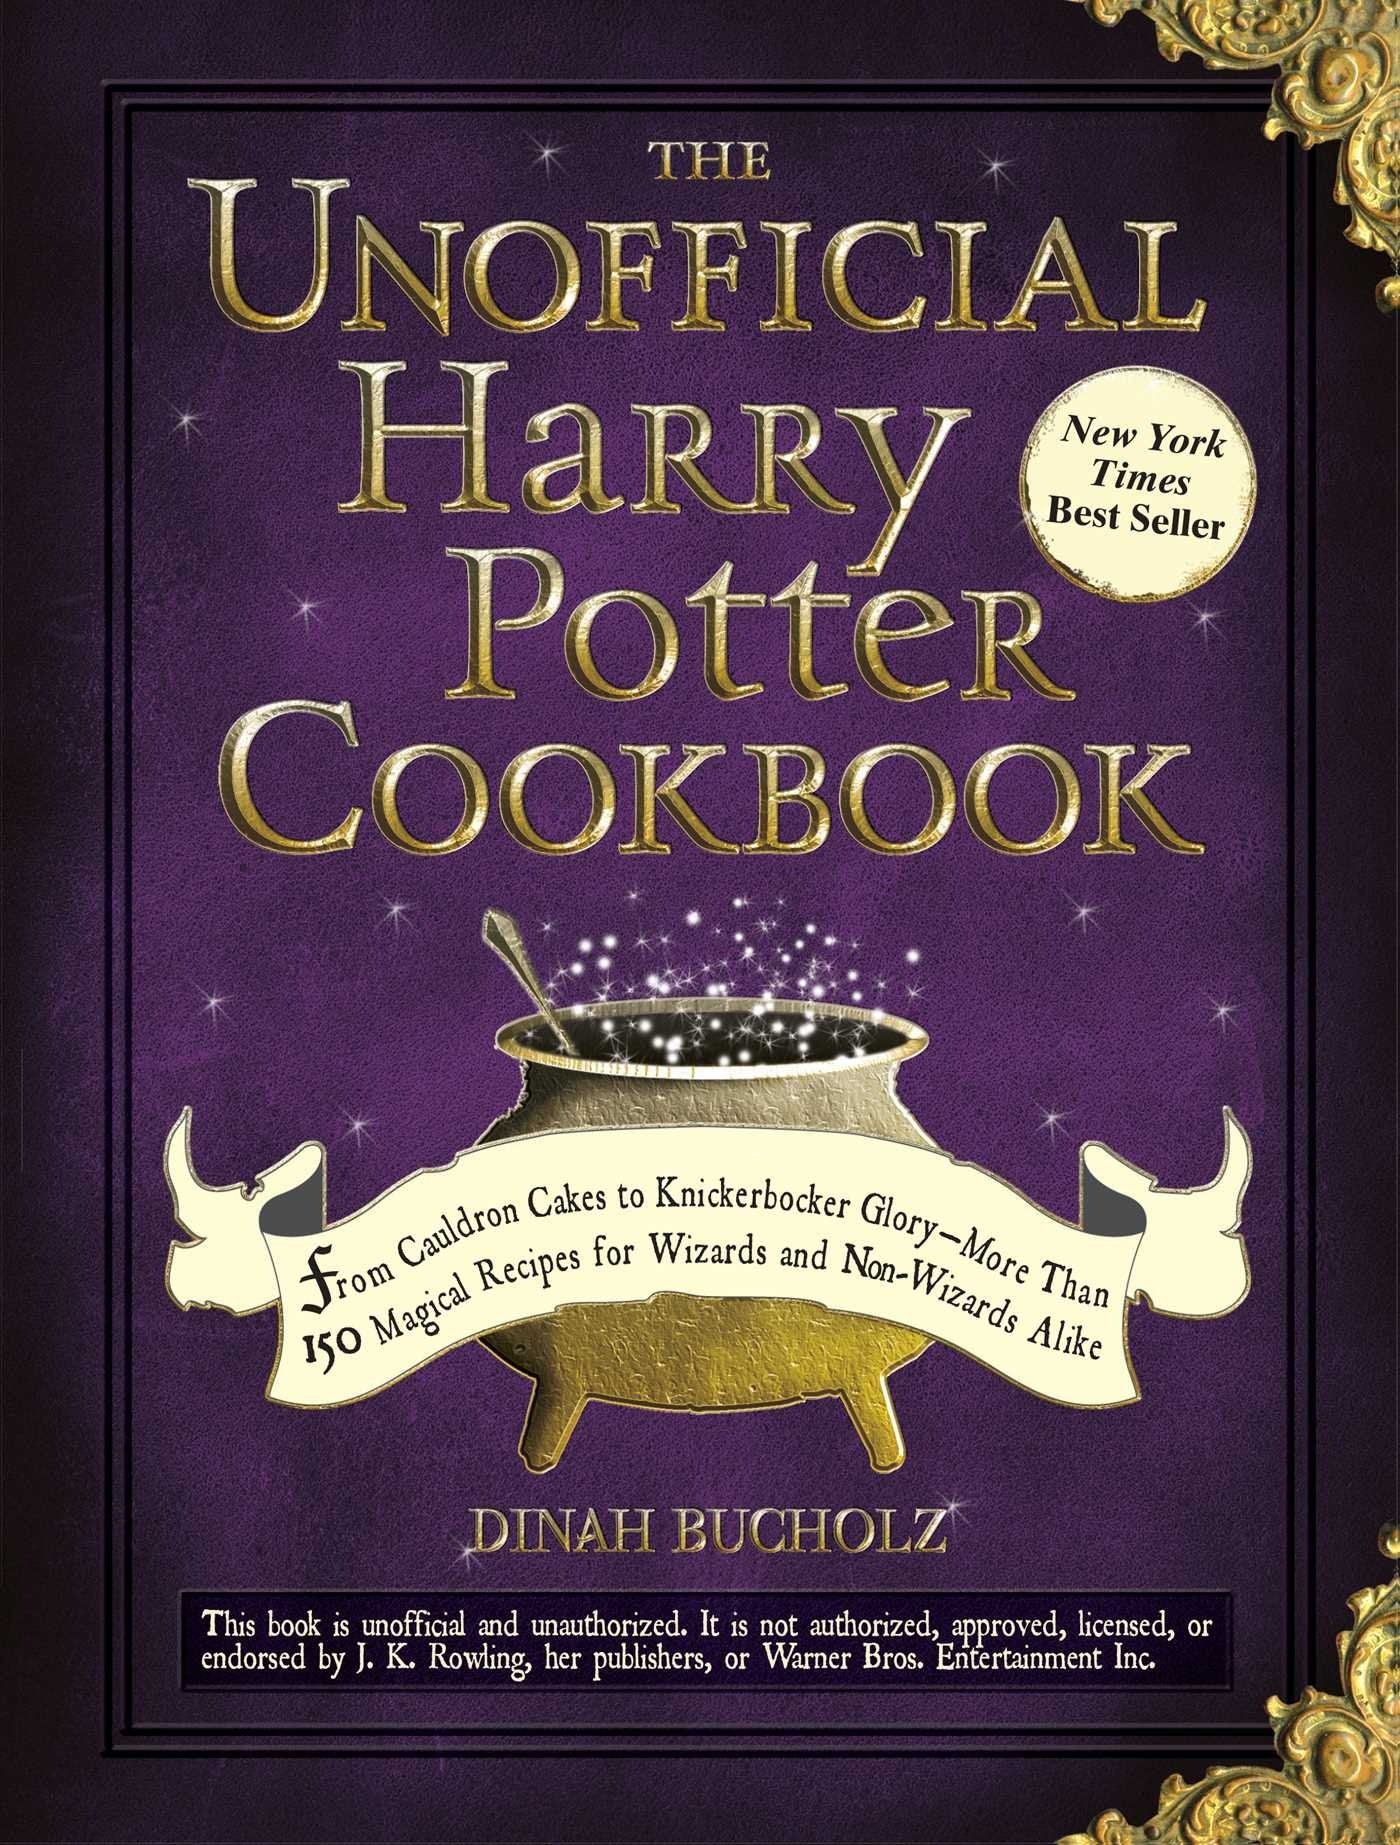 the black and purple Unofficial Harry Potter Cookbook cover with a cauldron on it